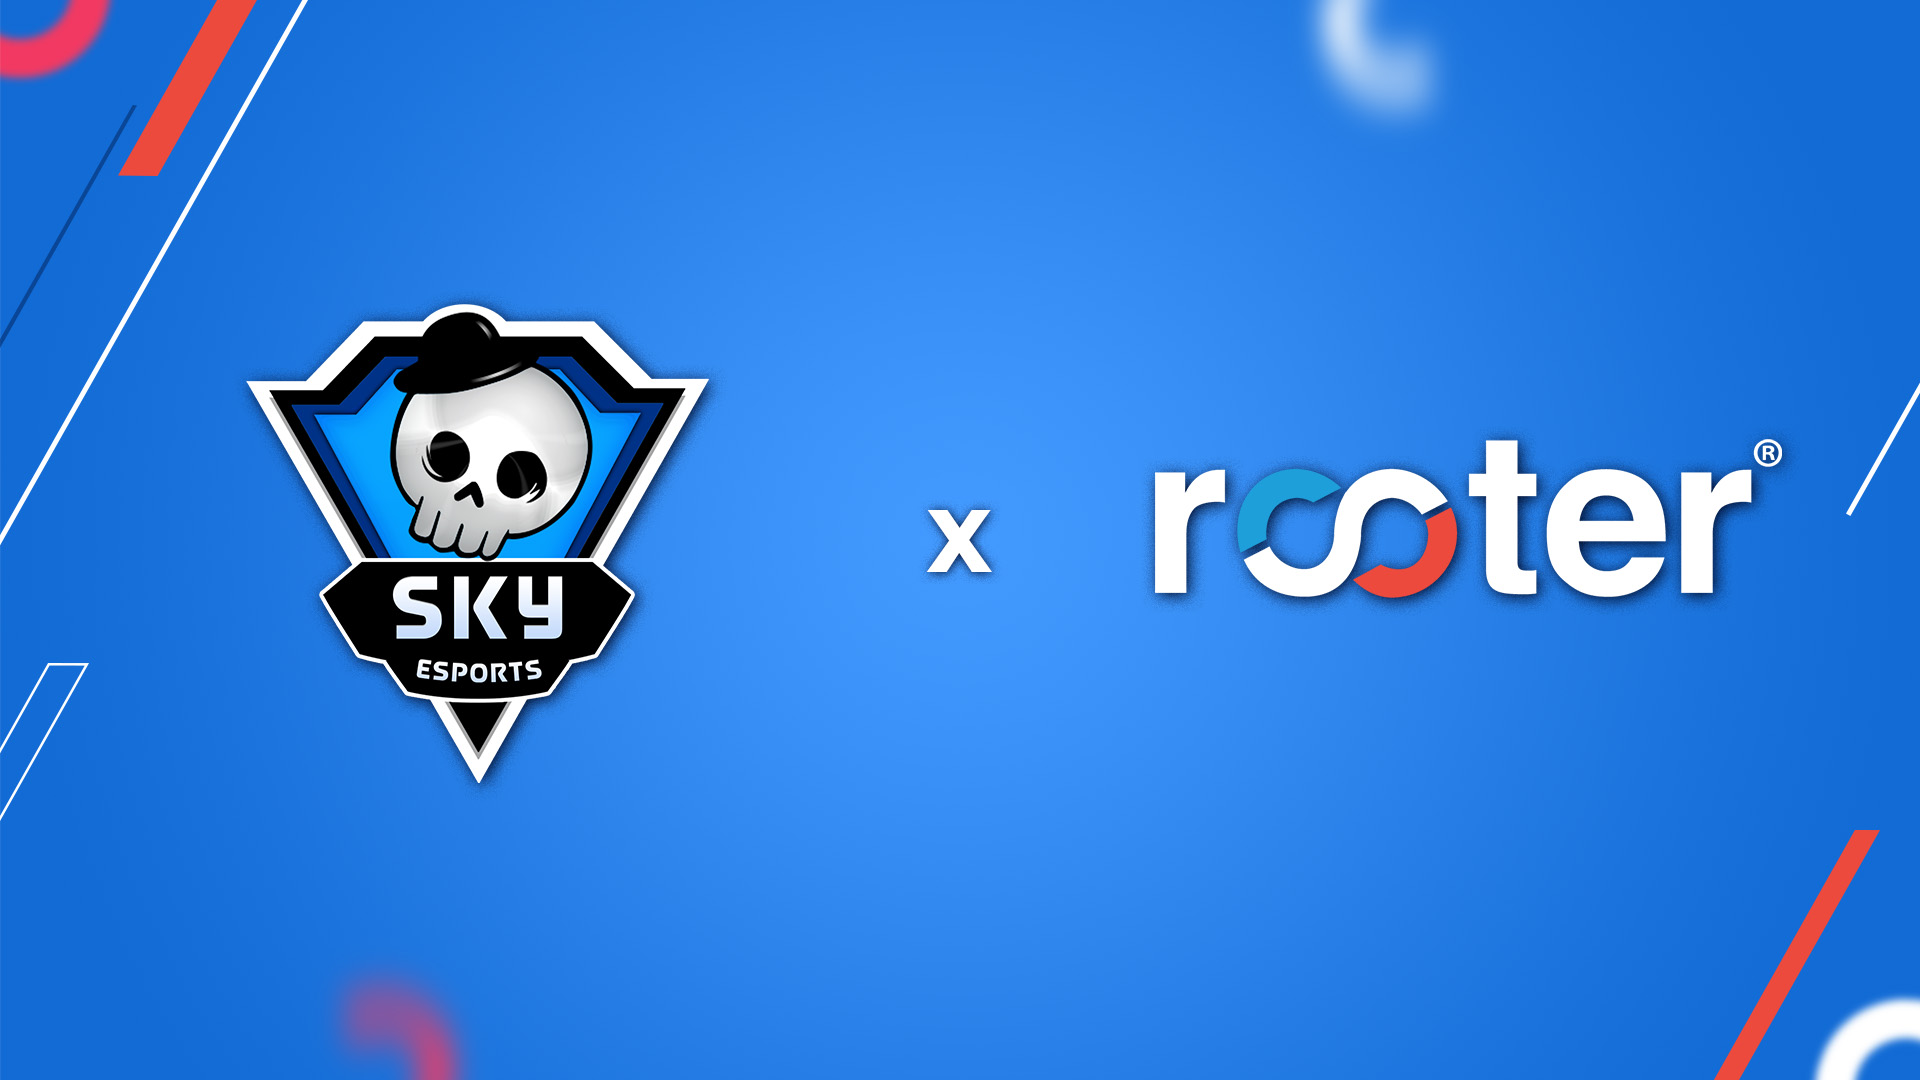 Skyesports sells media rights to Rooter for 2022 » TalkEsport